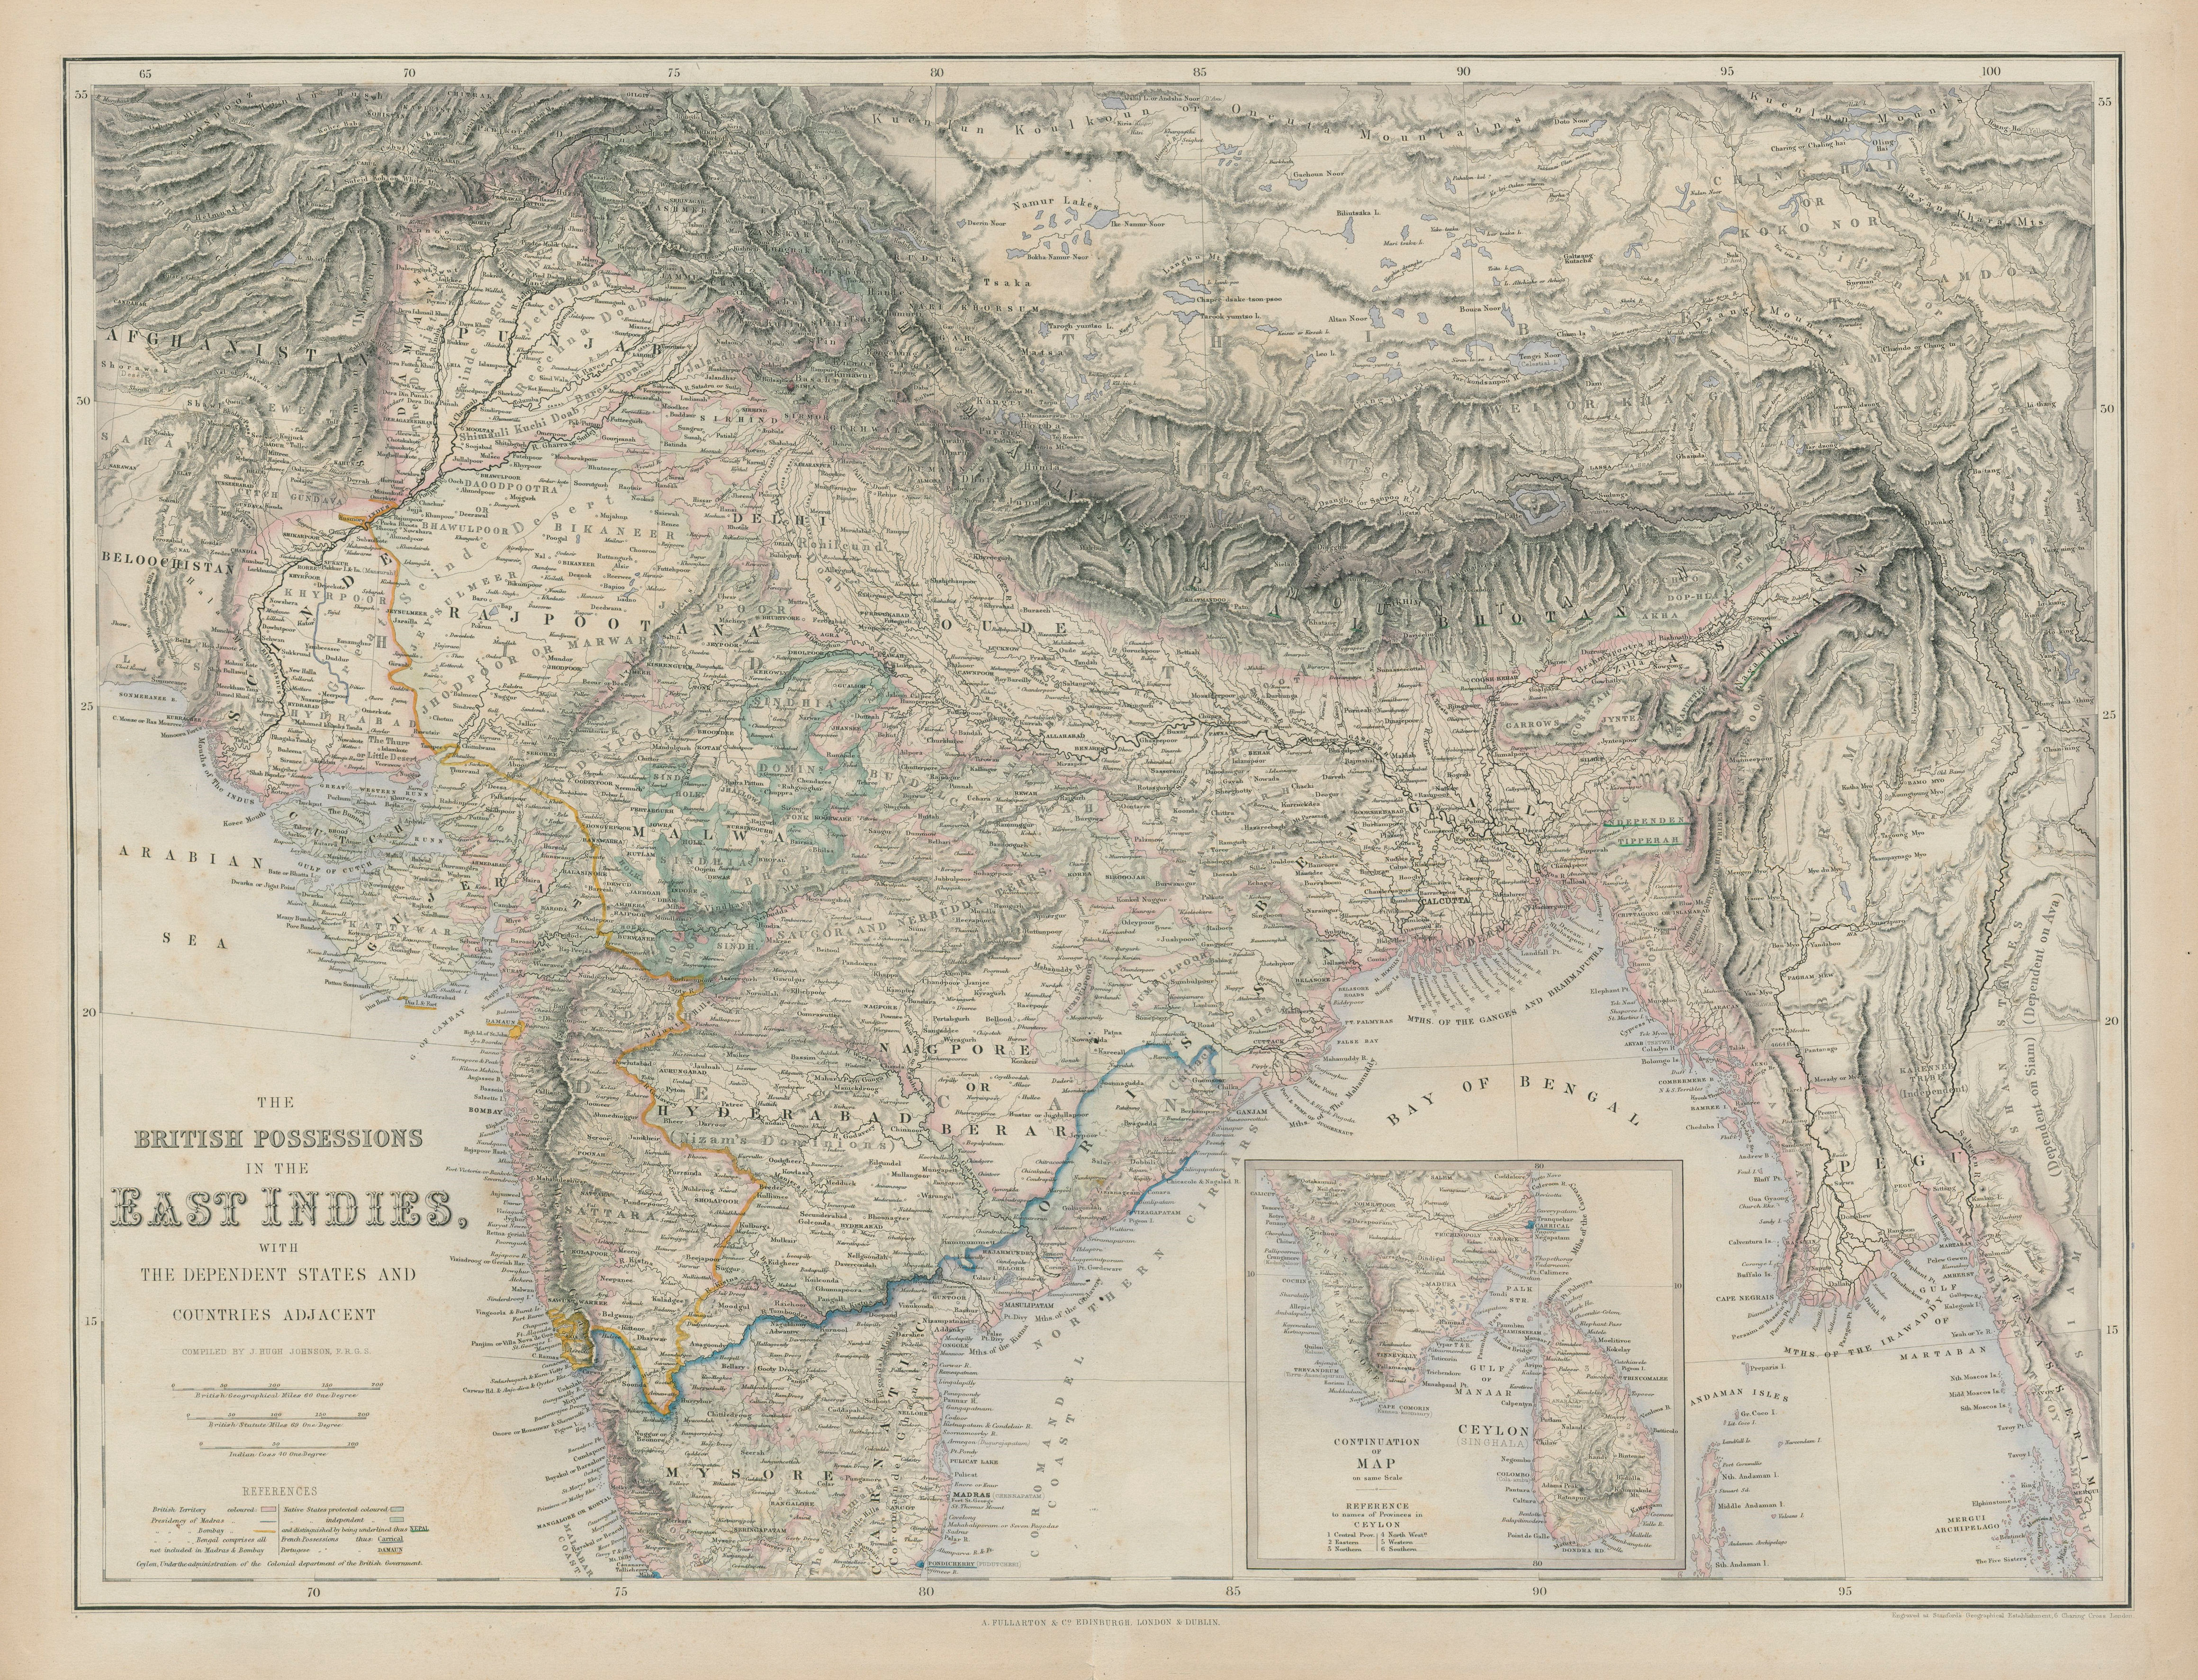 Associate Product British Possessions in the East Indies… India & Burma. SWANSTON 1860 old map